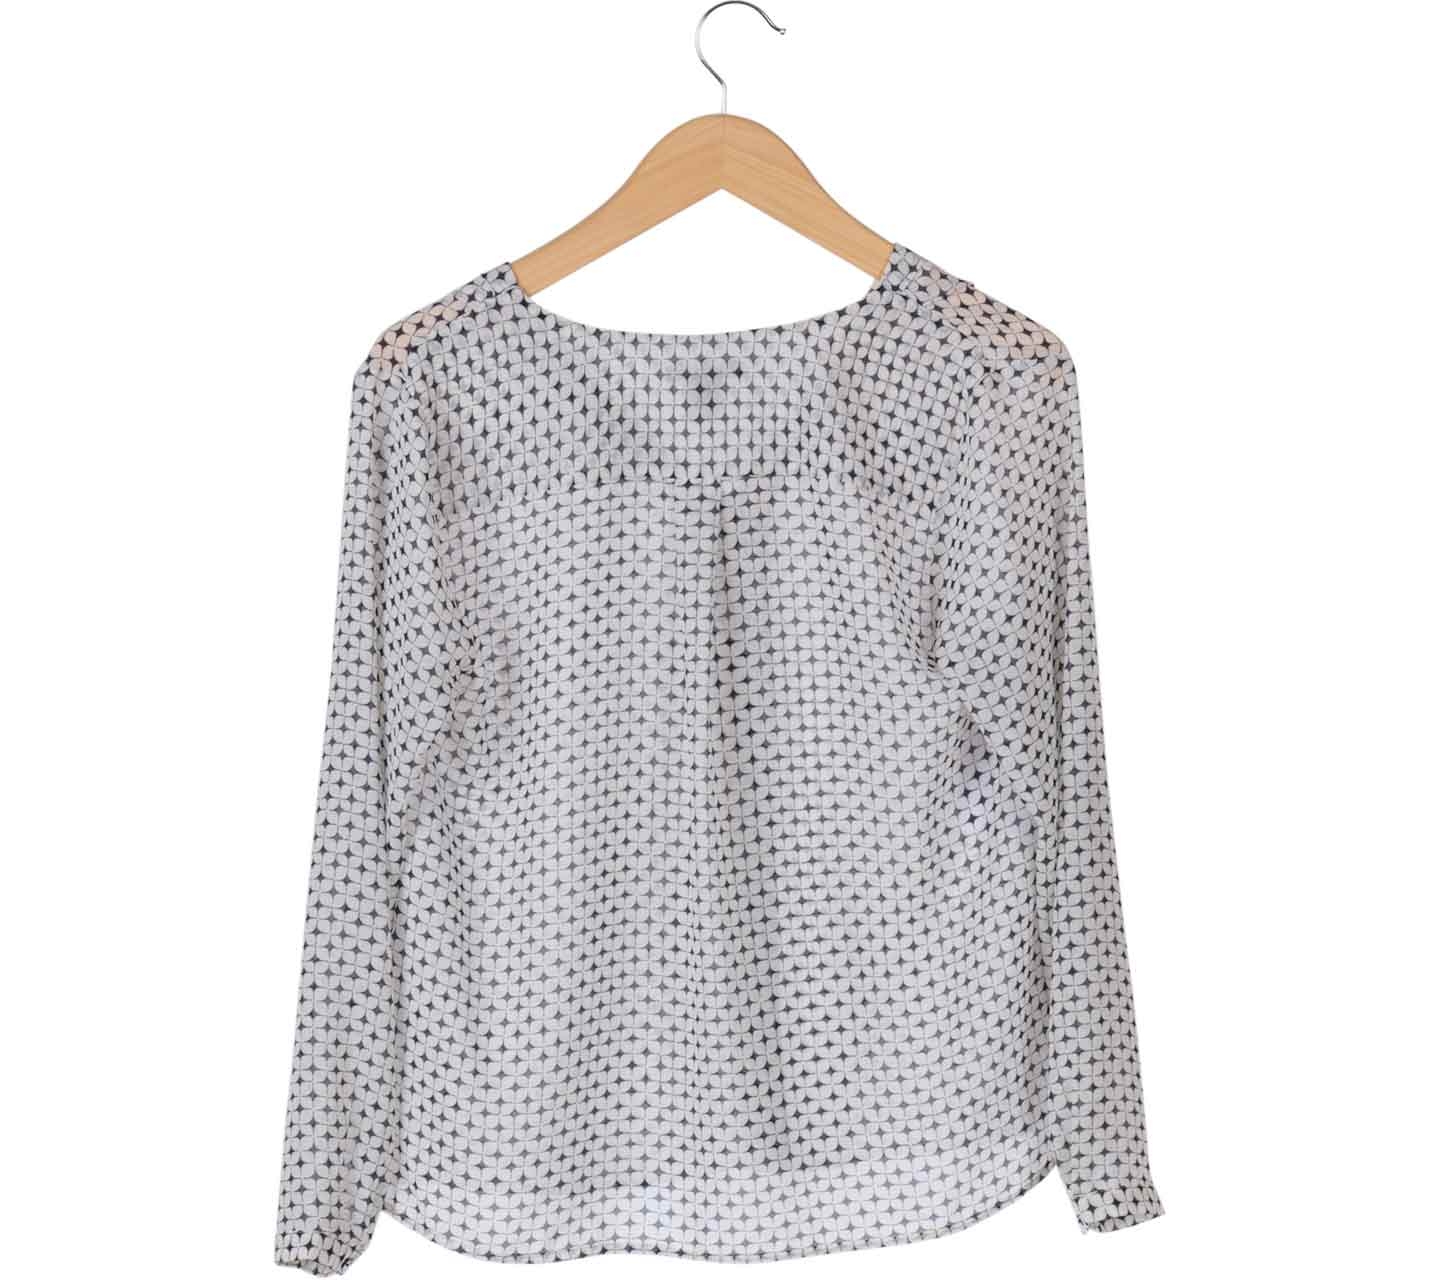 H&M White Patterned Blouse